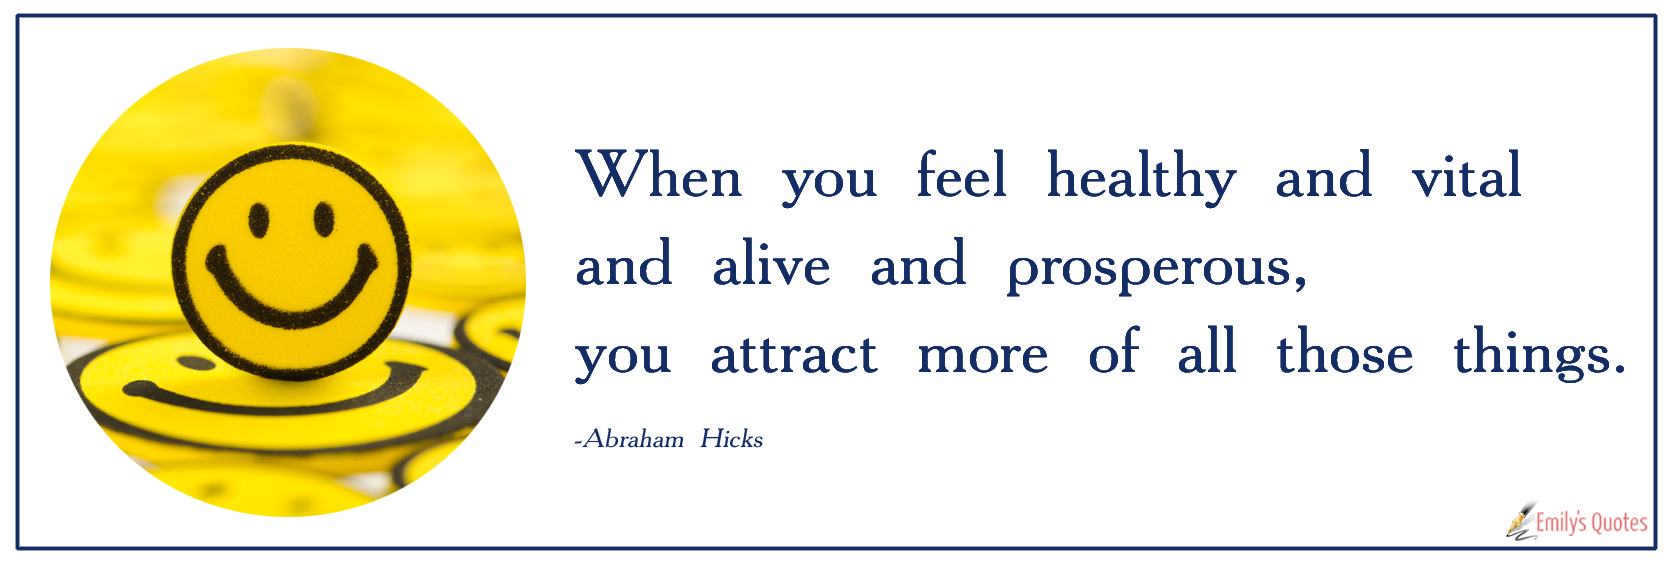 When you feel healthy and vital and alive and prosperous, you attract